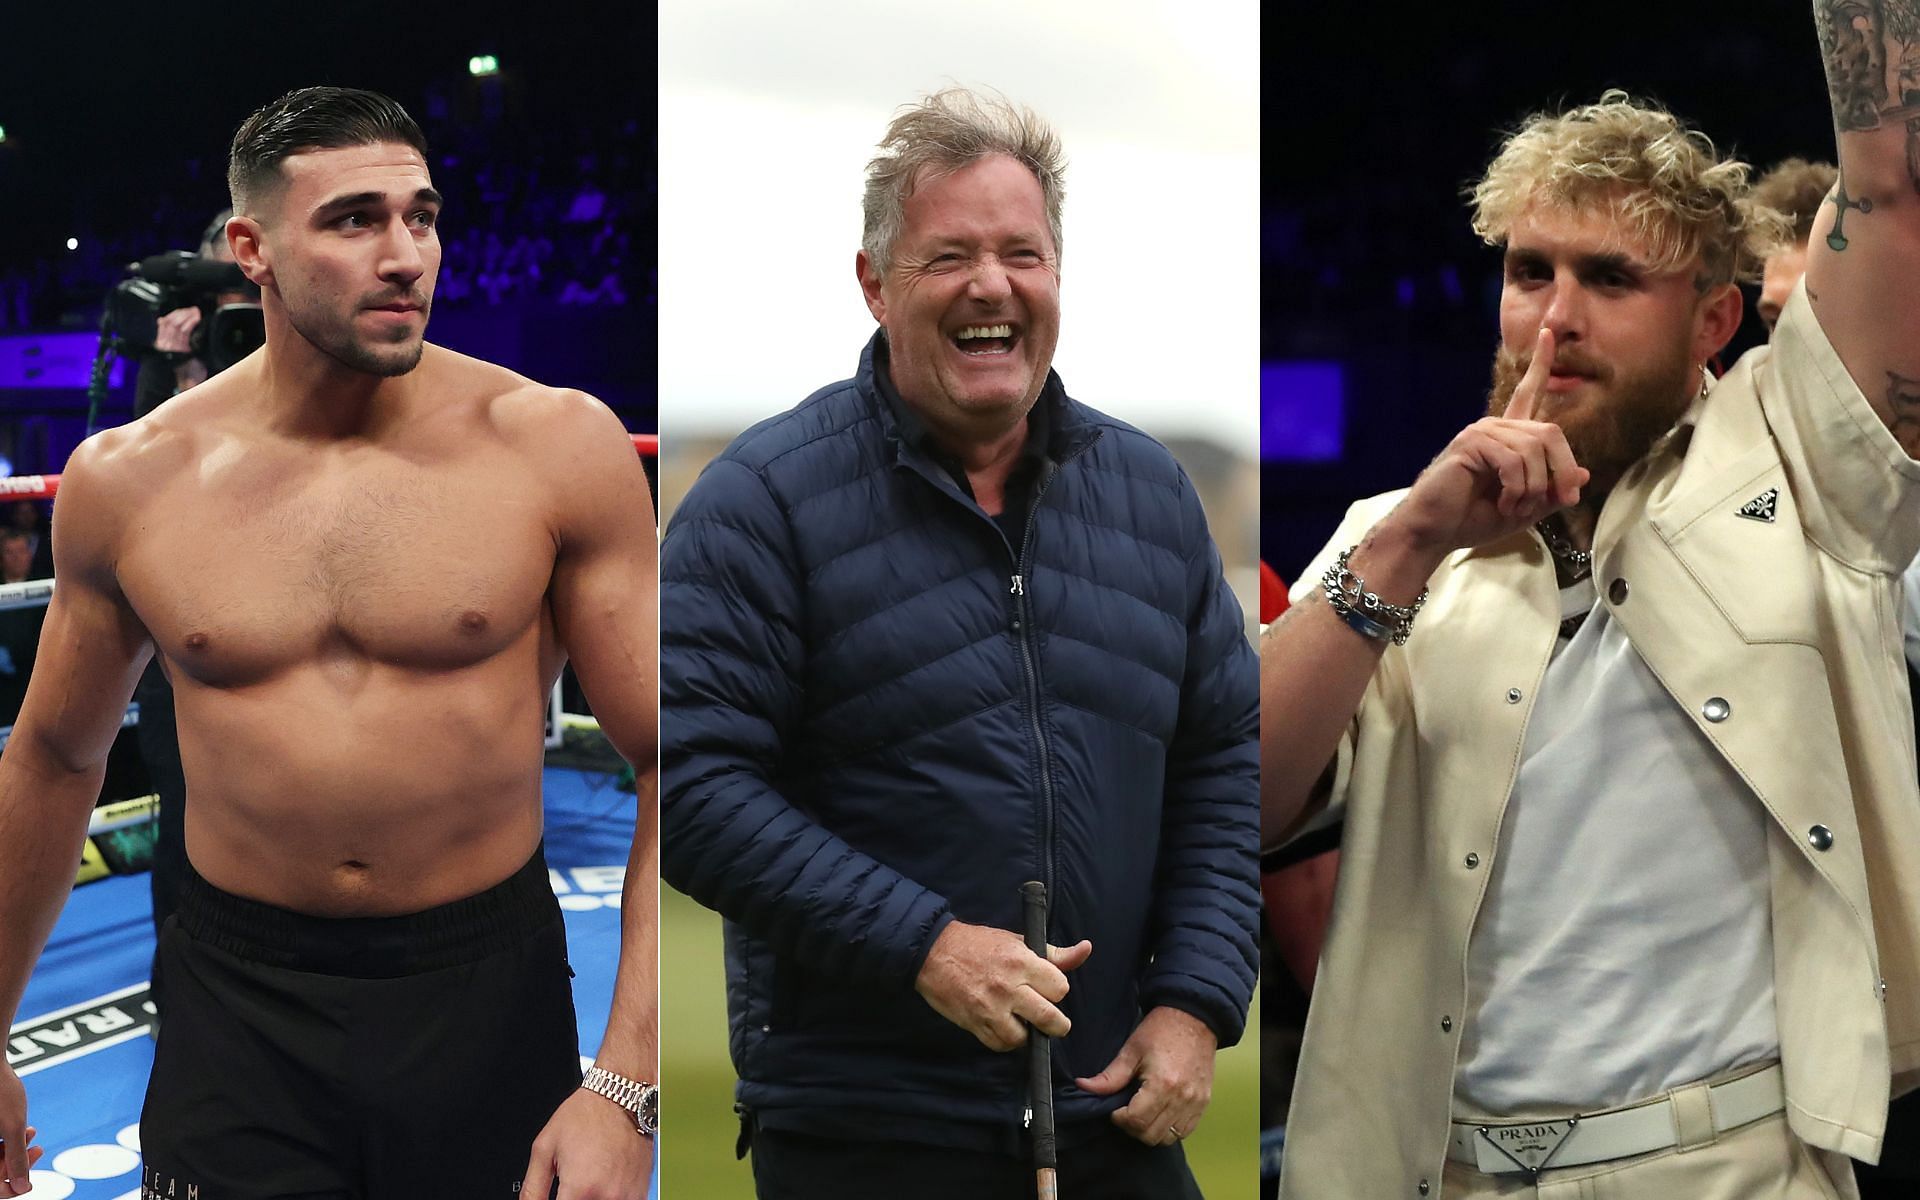 Tomm Fury (left), Piers Morgan (center), and Jake Paul (right) (Image credits Getty Images)